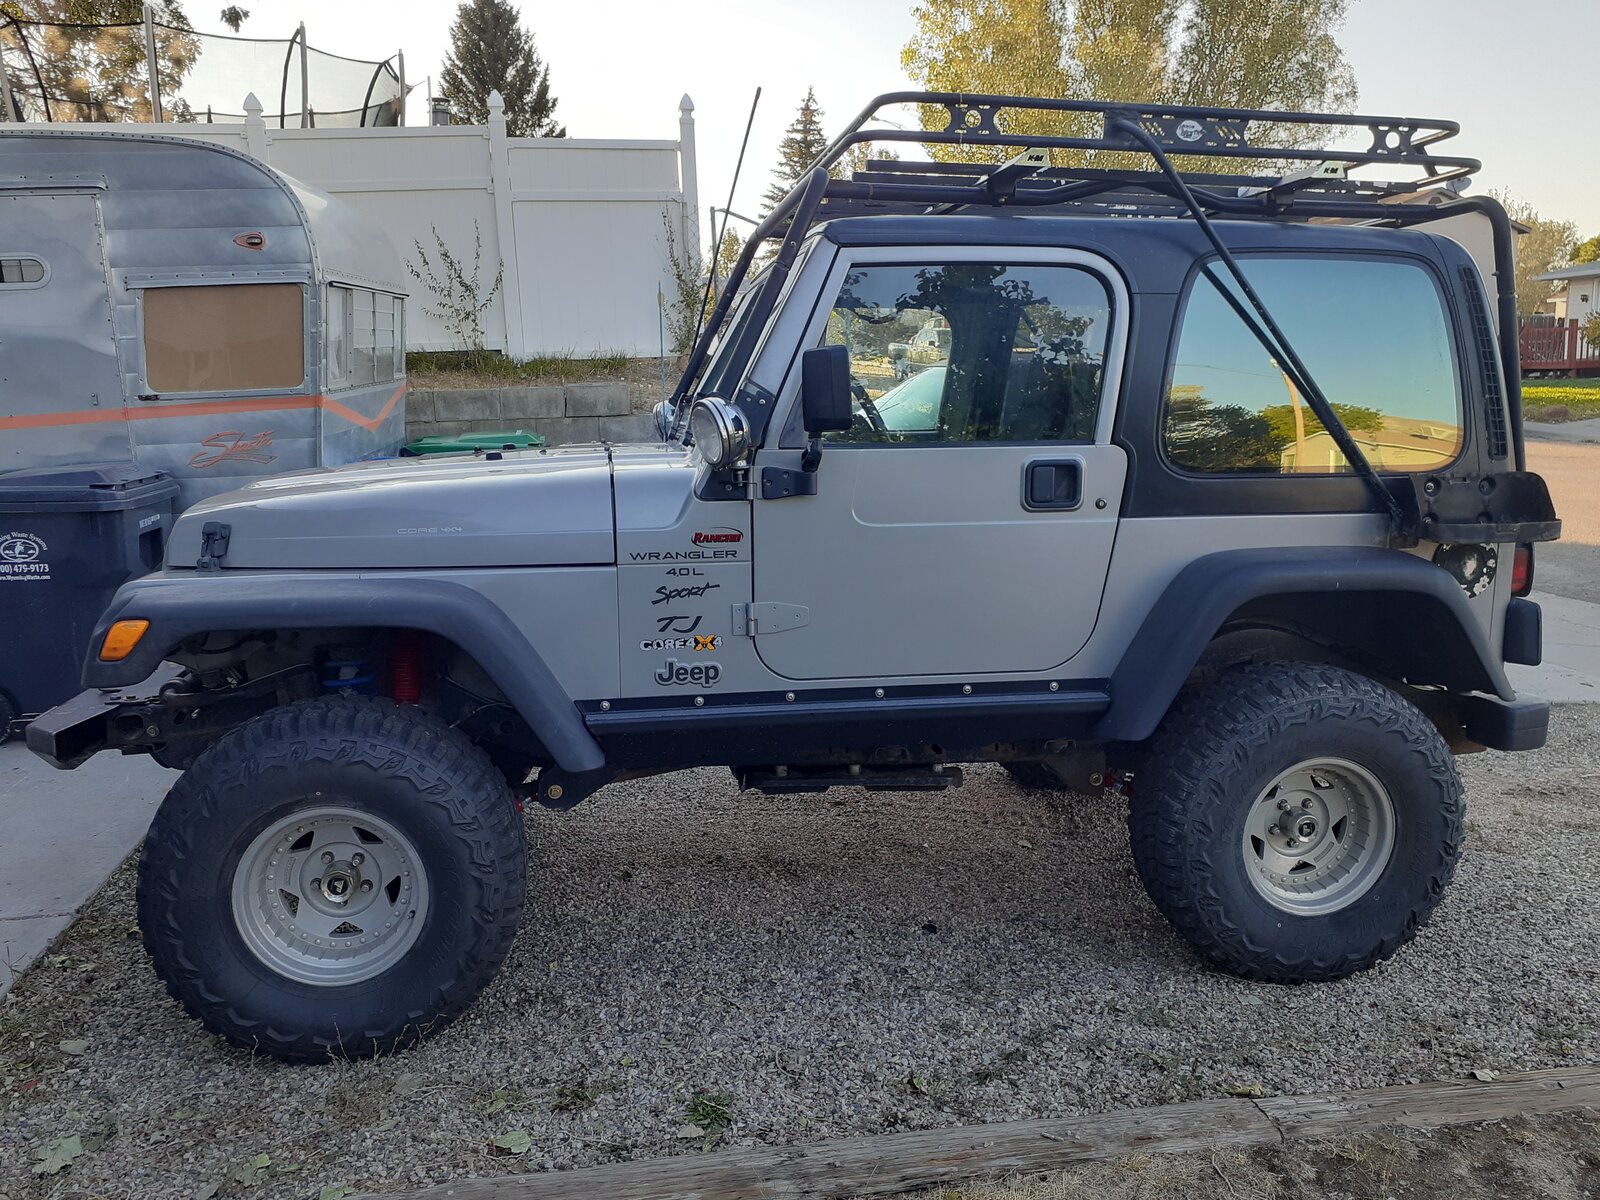 Vibration between 40 and 70 MPH | Jeep Wrangler TJ Forum